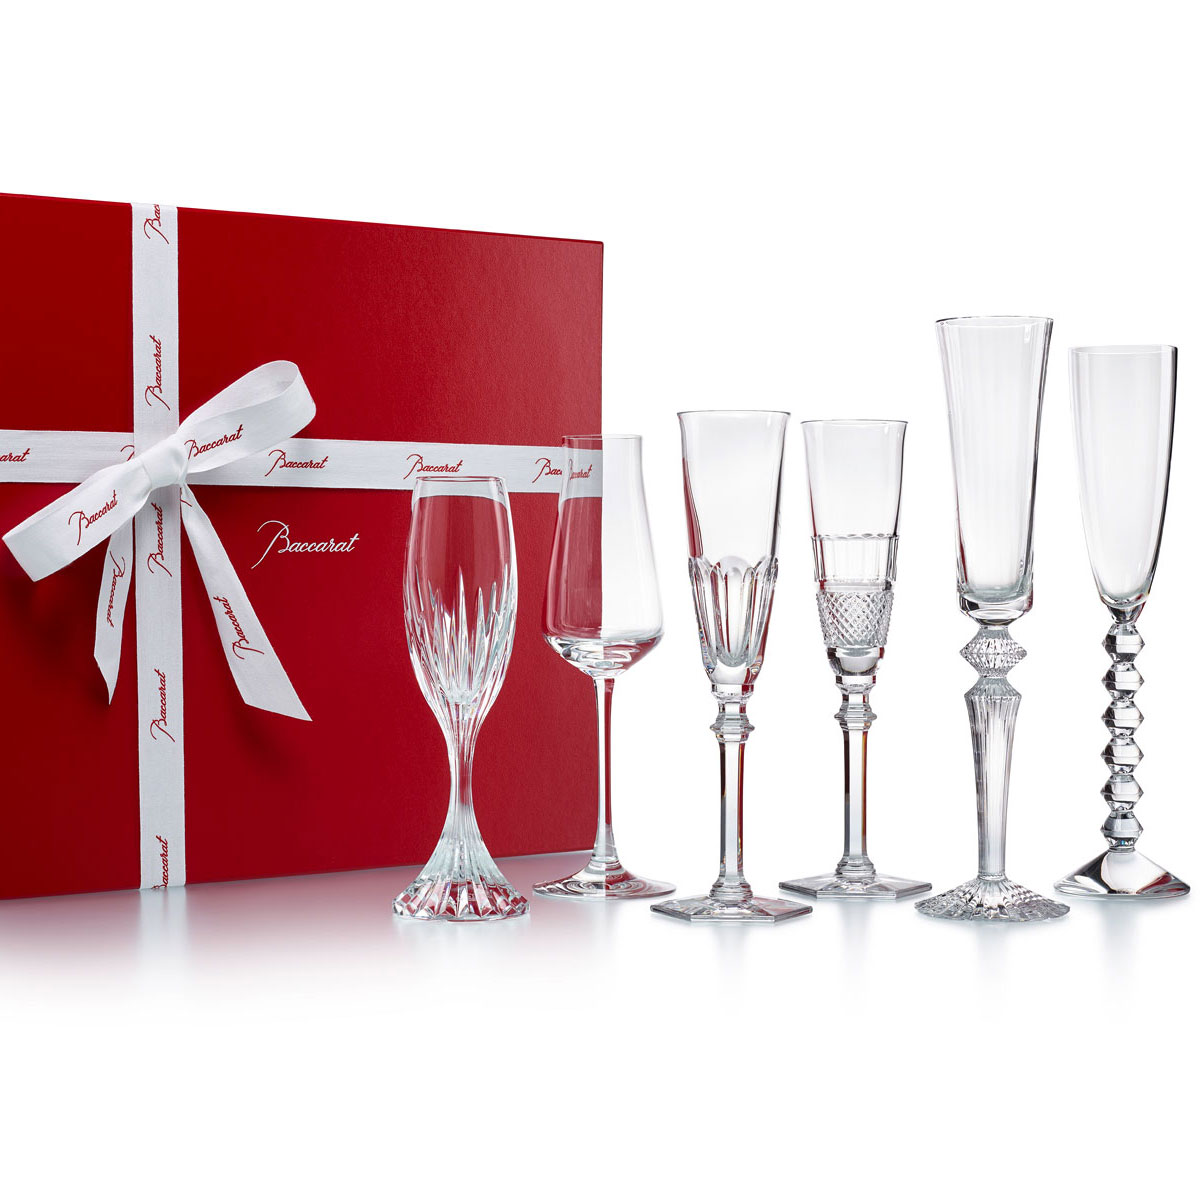 Baccarat Crystal, Cocktail Champagne Flutes Bubble Box, Gift Boxed Set of Six